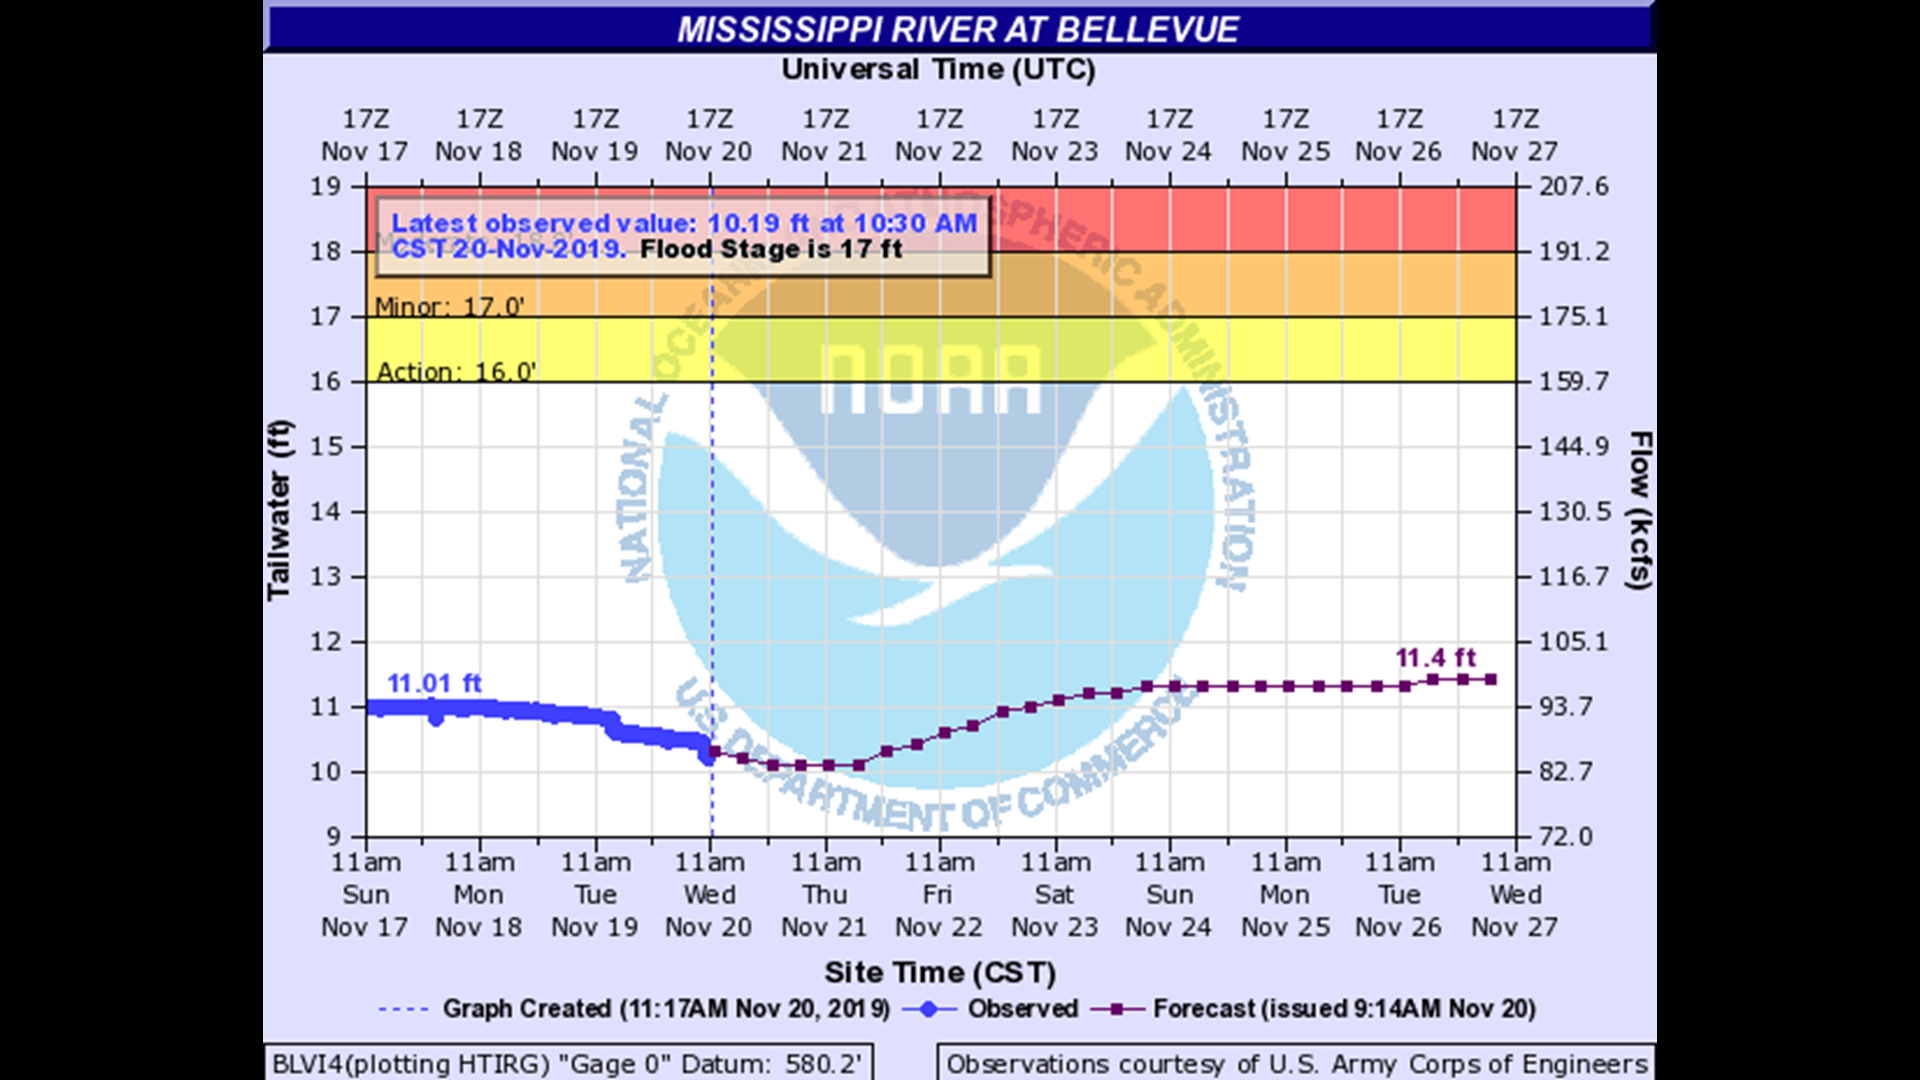 Everything you need to know about Mississippi River levels